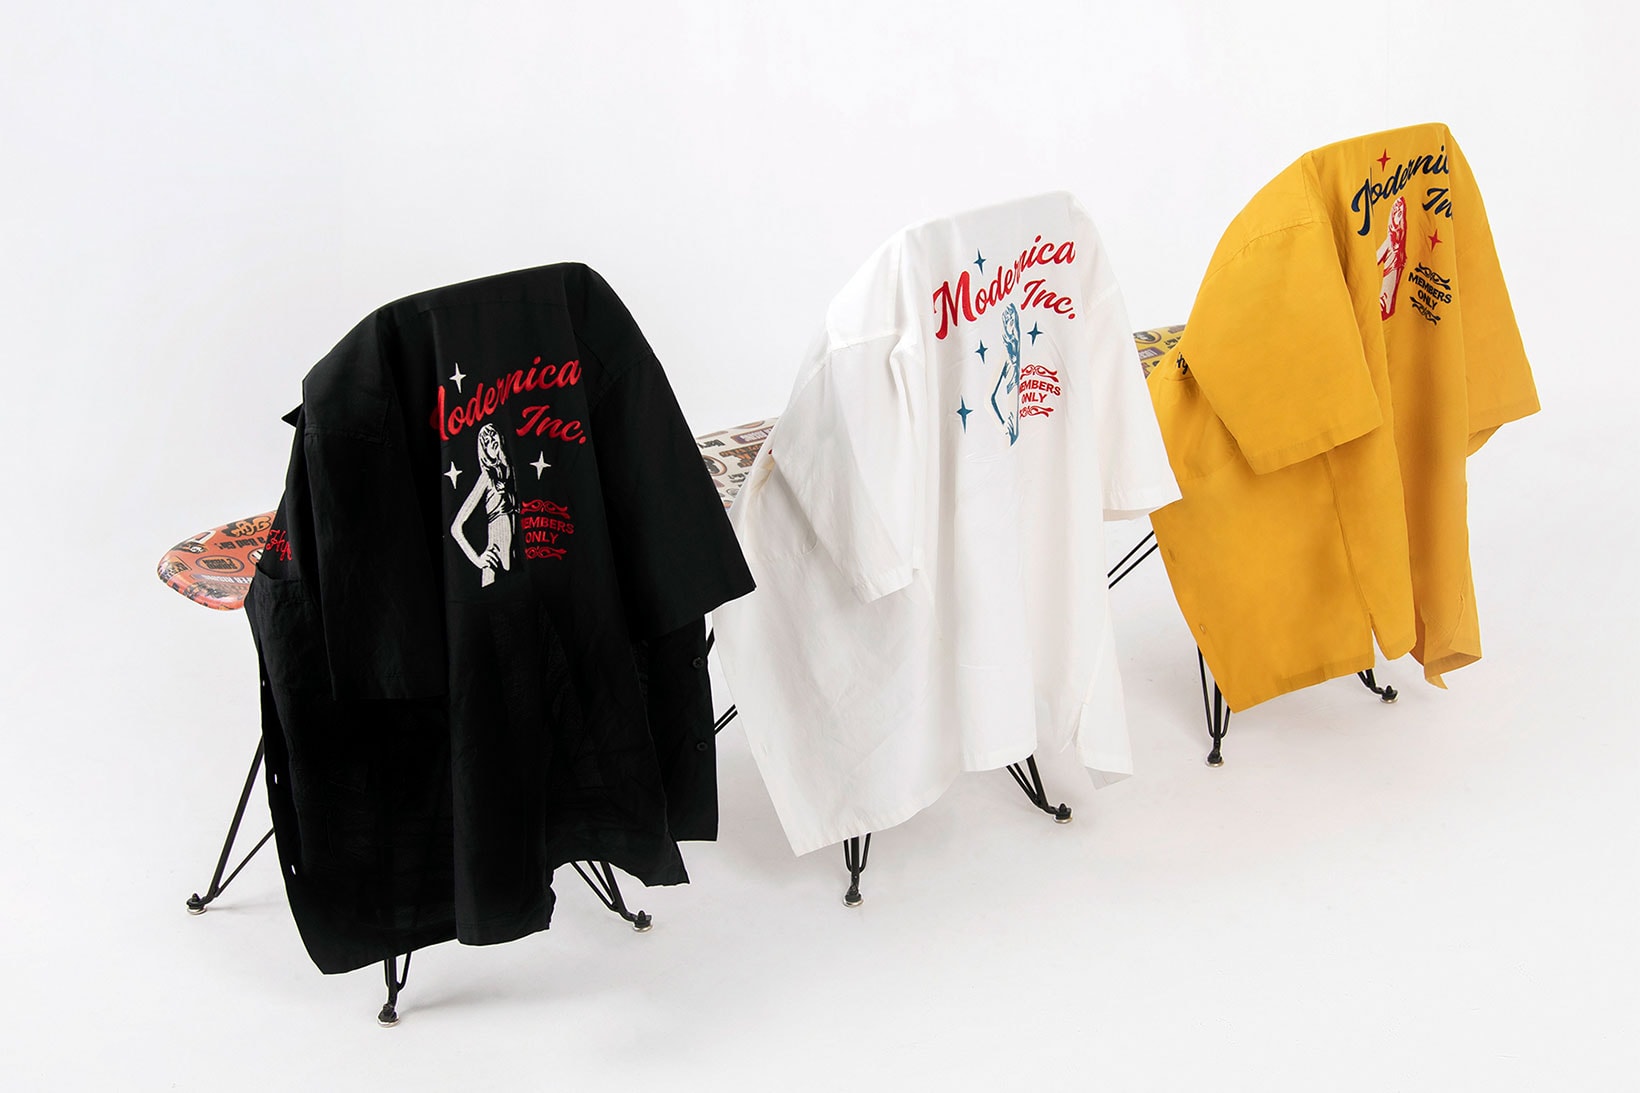 modernica hysteric glamour furniture collaboration side shell chairs daybed aiko side table hoodies jackets